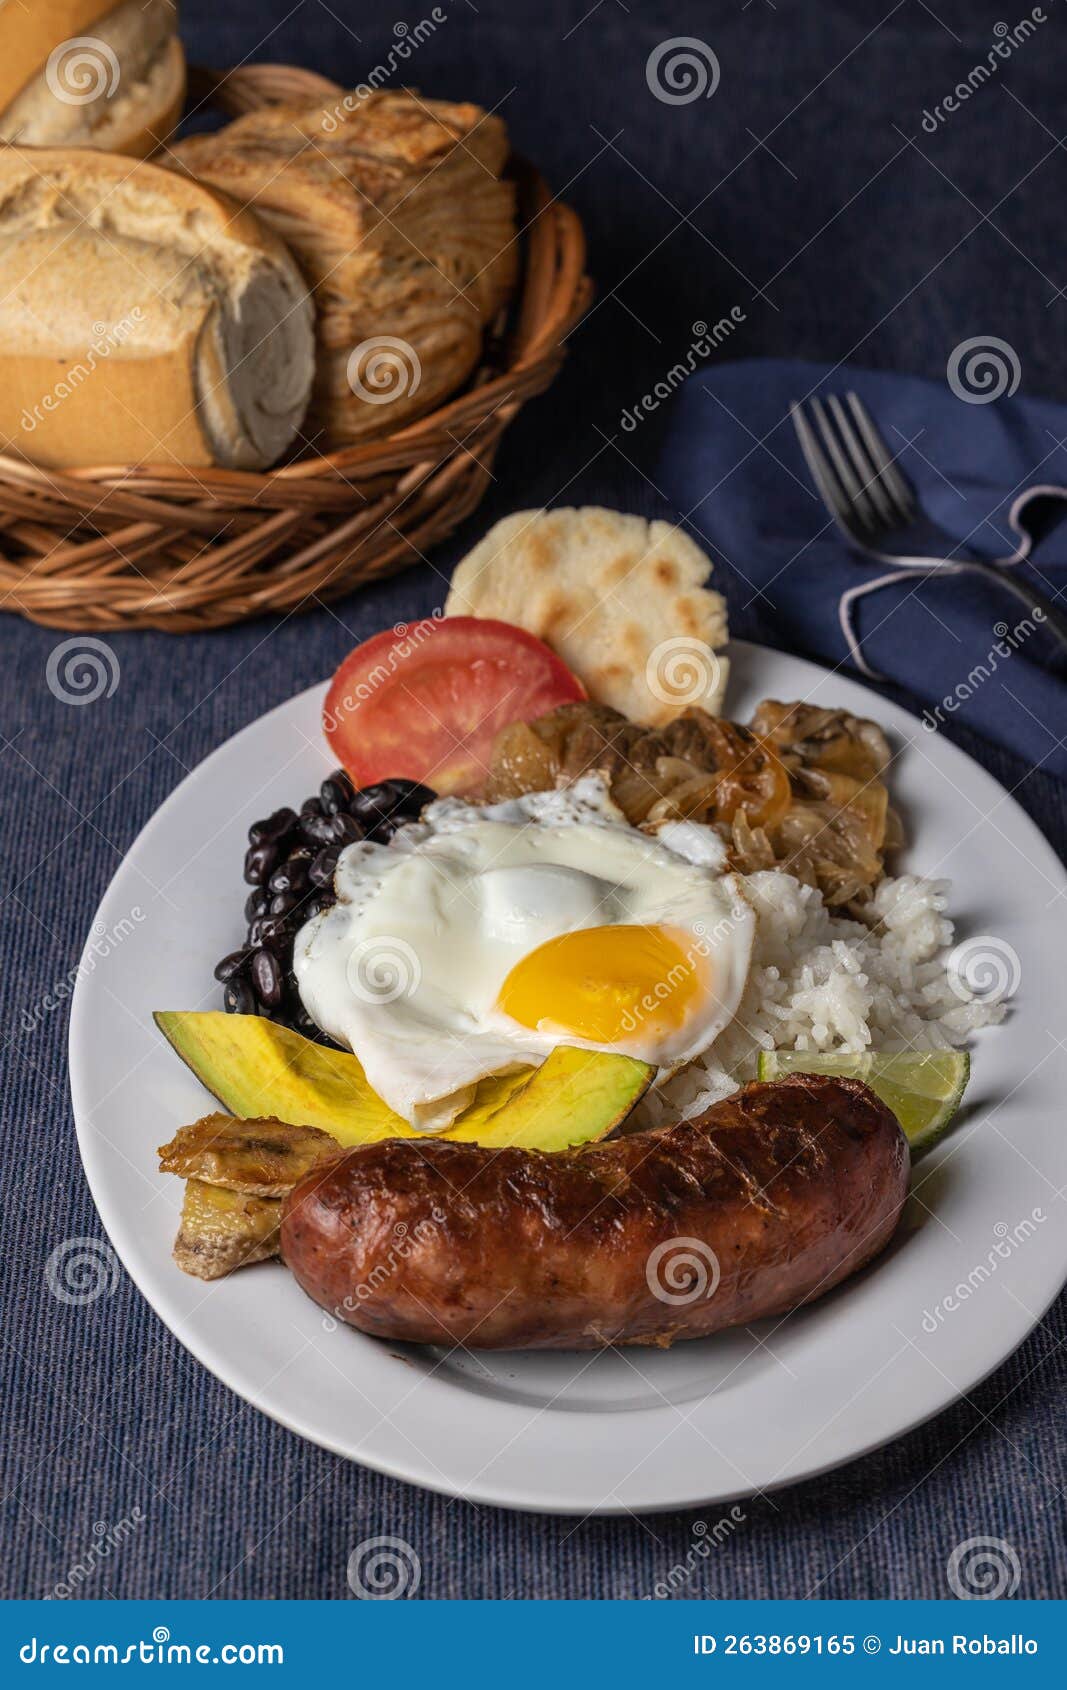 bandeja paisa, typical food of colombia with beans, rice, eggs and pork